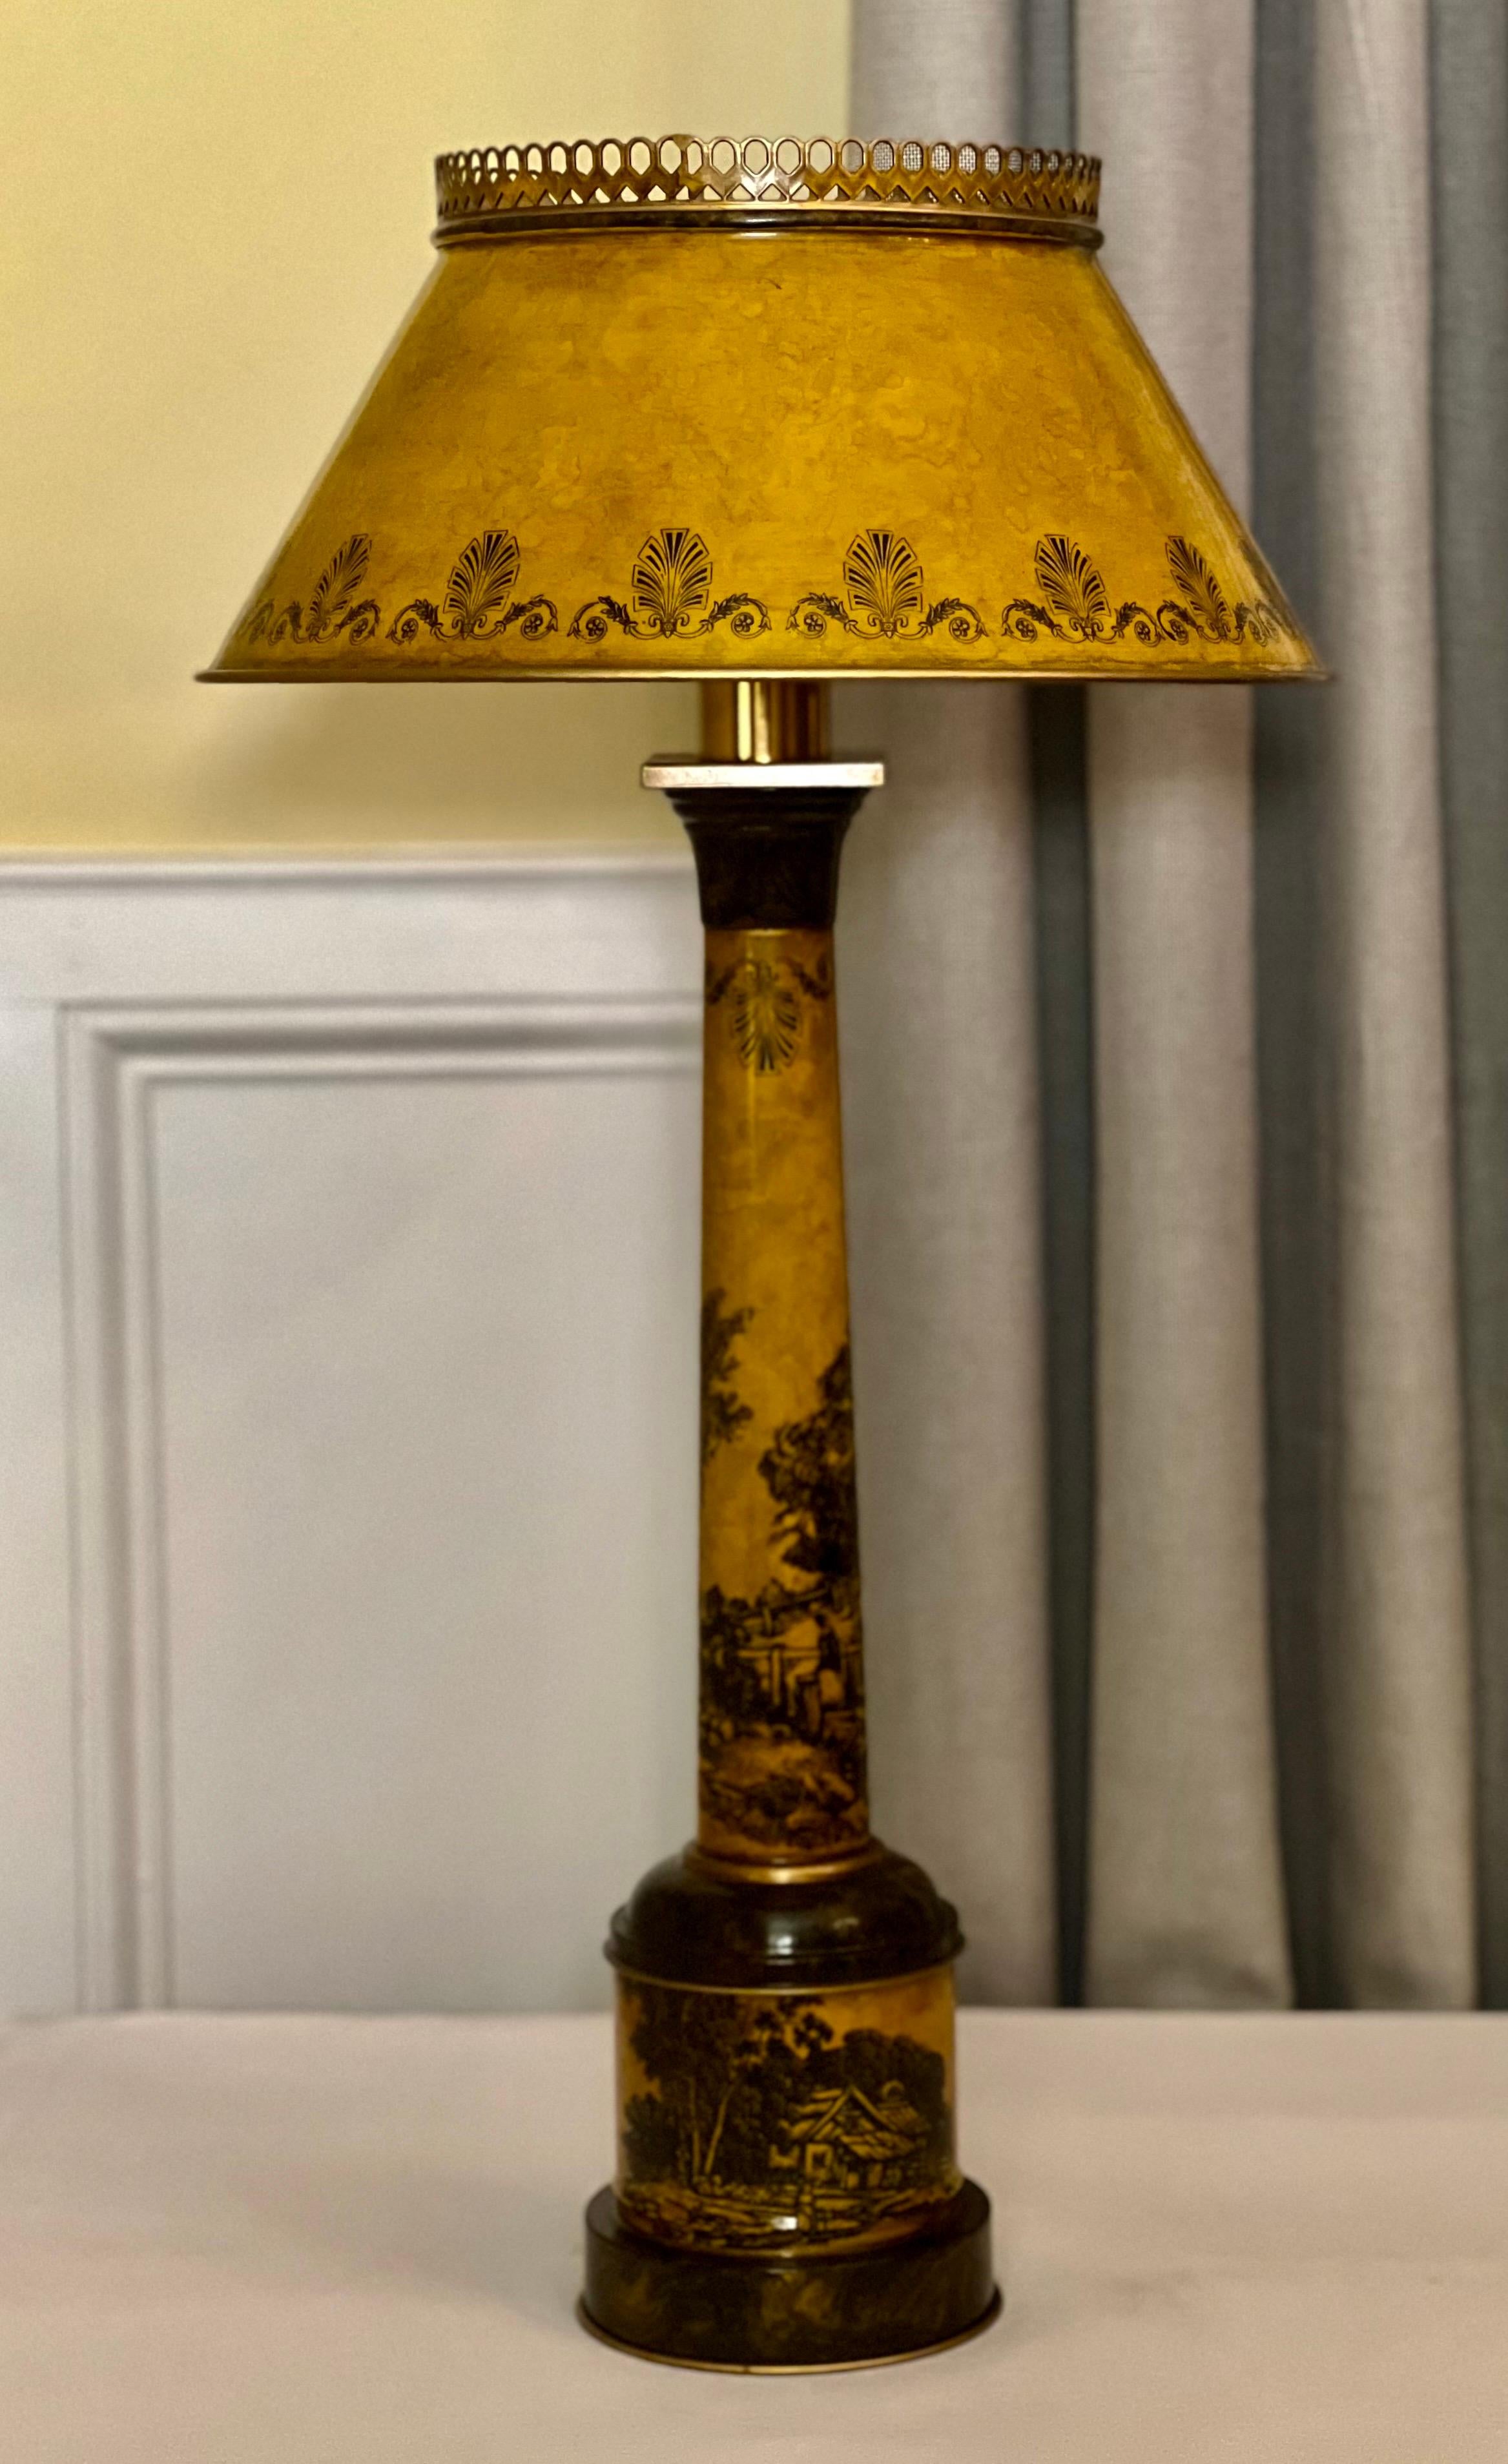 Mid 20th century Italian tole lamp with original shade.

Fine Italian tole column form table lamp in a warm ochre hue. It is intricately painted with a tranquil pastoral scene with animals, figures, a farmhouse, fence and elements of nature. The